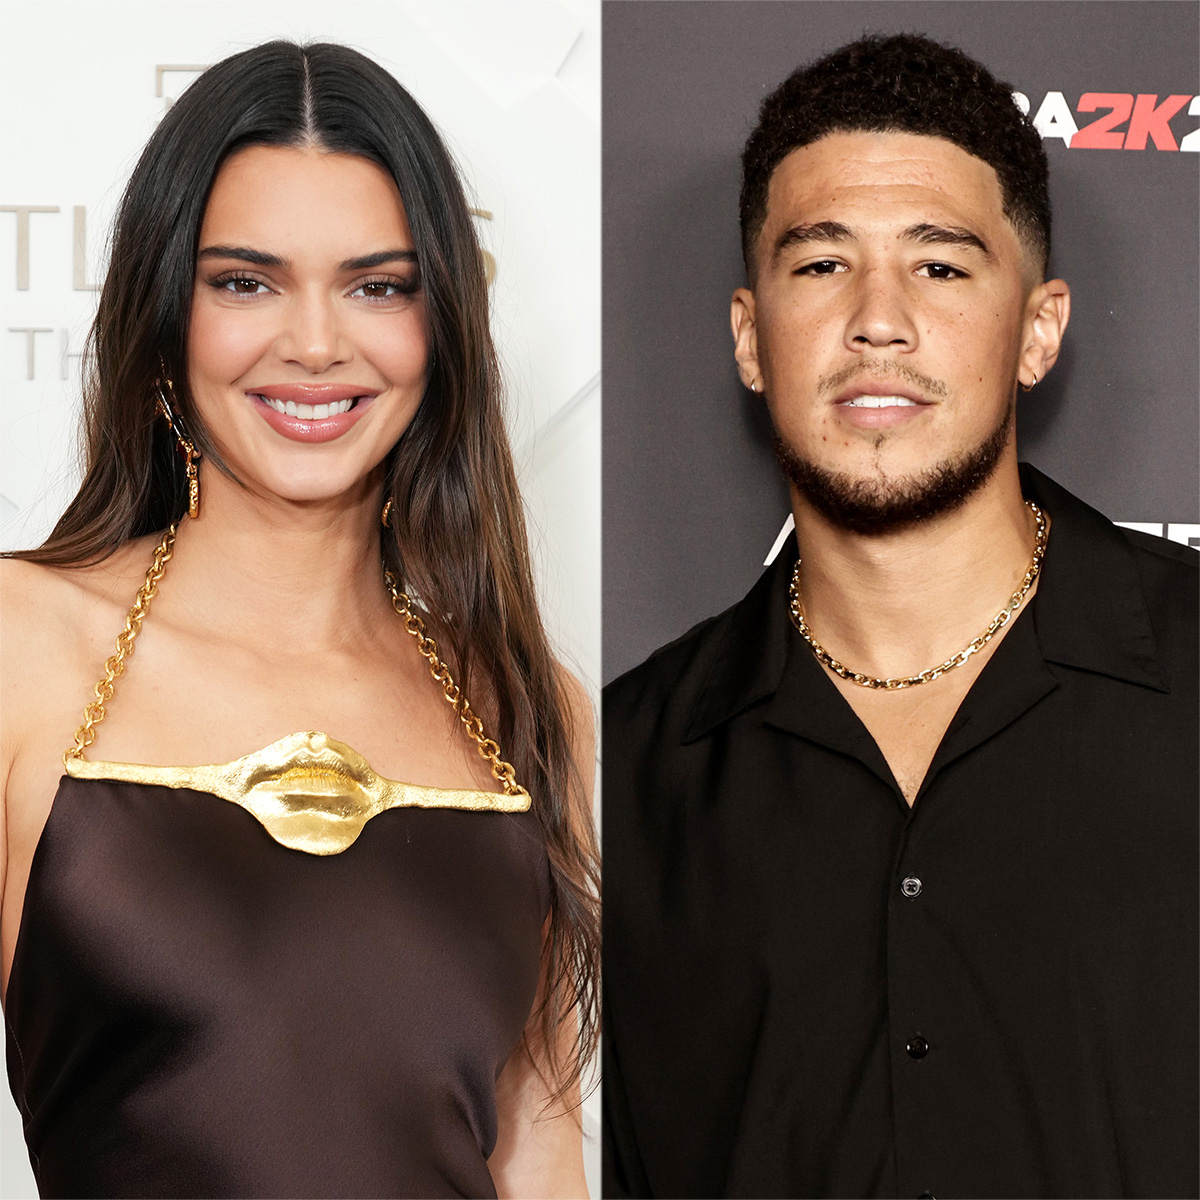 Definitive Proof Kendall Jenner Is Dating a Basketball Player